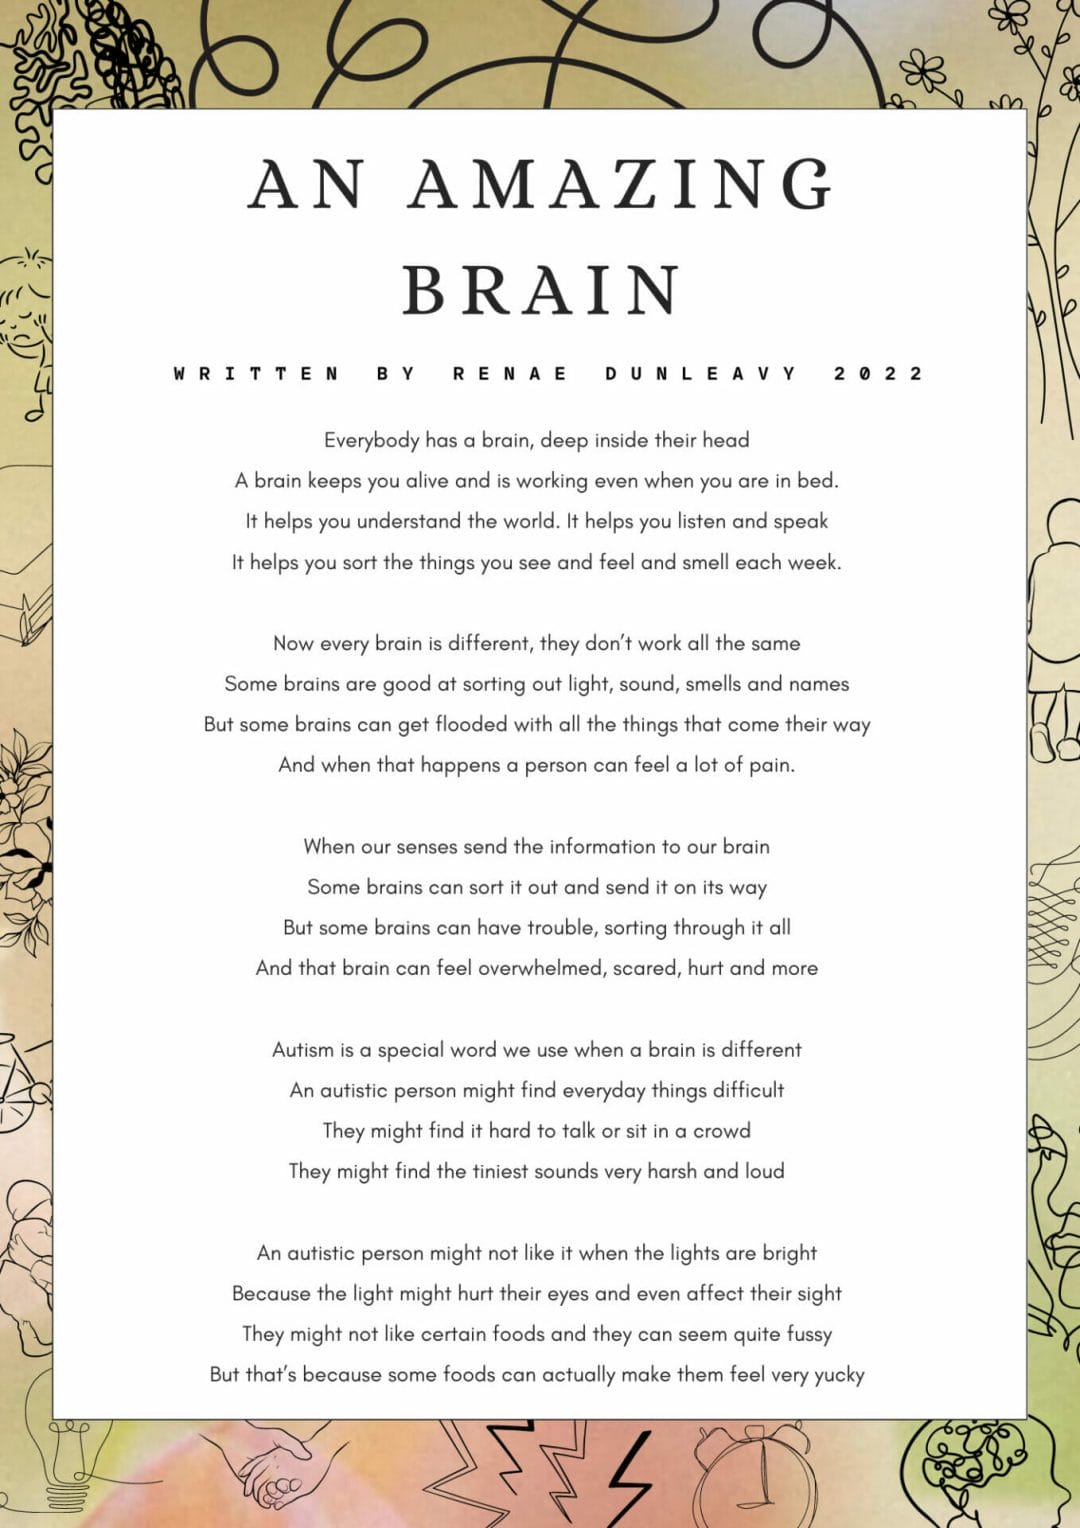 AN AMAZING BRAIN WRITΤΕΝ BY RENAE DUNLEAVY 2022 Everybody has a brain, deep inside their head A brain keeps you alive and is working even when you are in bed. It helps you understand the world. It helps you listen and speak It helps you sort the things you see and feel and smell each week. Now every brain is different, they don't work all the same Some brains are good at sorting out light, sound, smells and names But some brains can get flooded with all the things that come their way And when that happens a person can feel a lot of pain. When our senses send the information to our brain Some brains can sort it out and send it on its way But some brains can have trouble, sorting through it all And that brain can feel overwhelmed, scared, hurt and more Autism is a special word we use when a brain is different An autistic person might find everyday things difficult They might find it hard to talk or sit in a crowd They might find the tiniest sounds very harsh and loud An autistic person might not like it when the lights are bright Because the light might hurt their eyes and even affect their sight They might not like certain foods and they can seem quite fussy But that's because some foods can actually make them feel very yucky